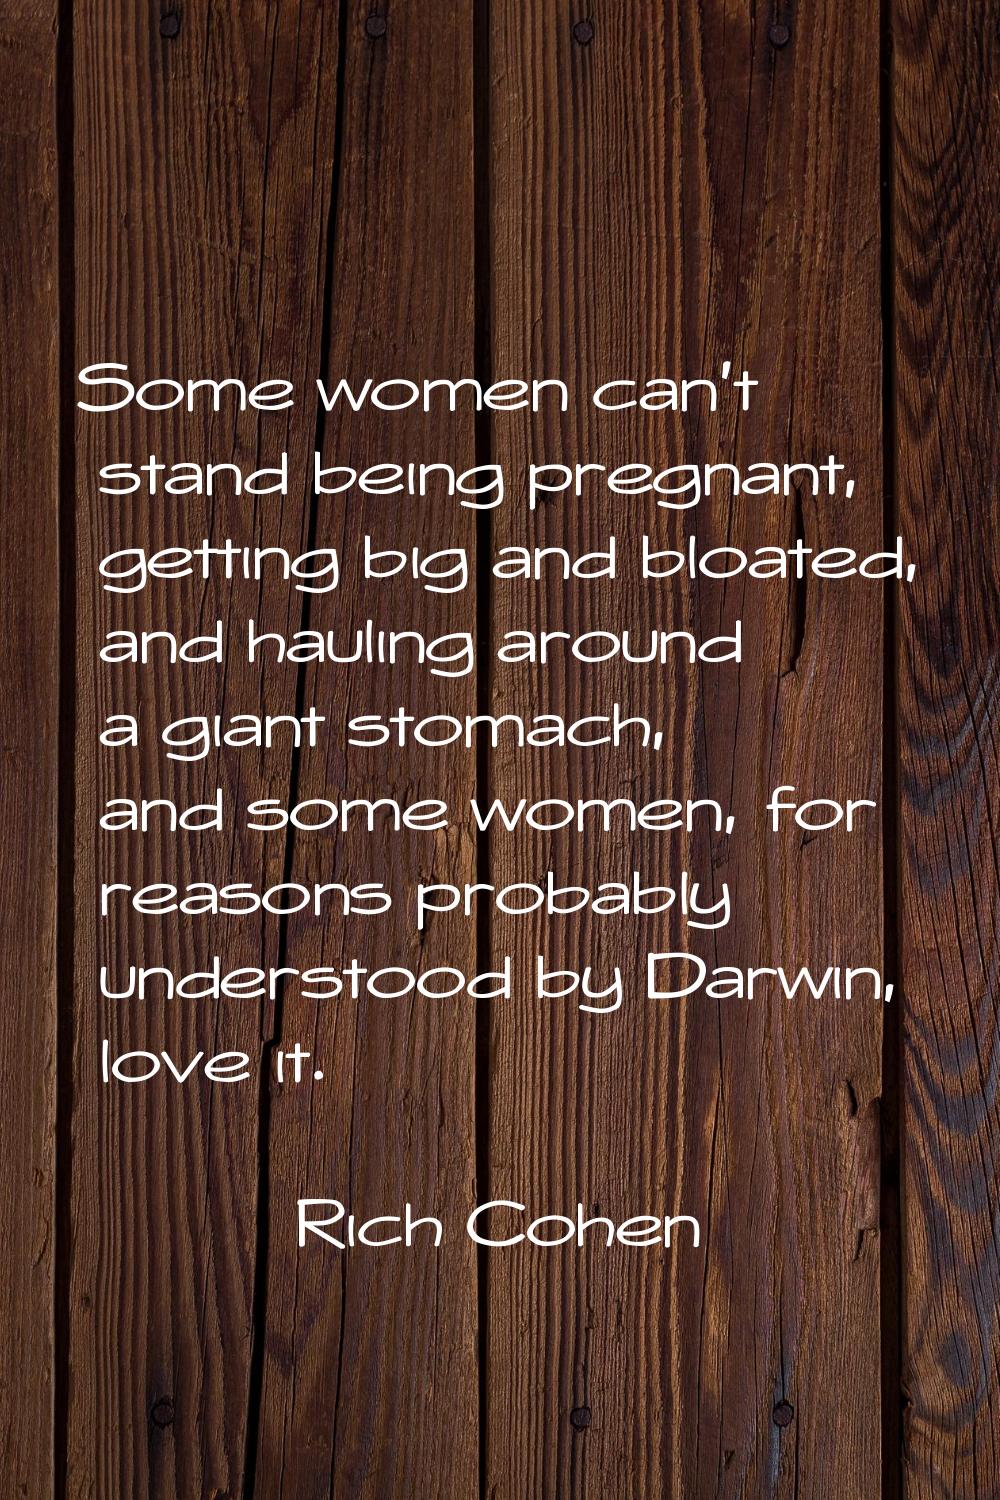 Some women can't stand being pregnant, getting big and bloated, and hauling around a giant stomach,